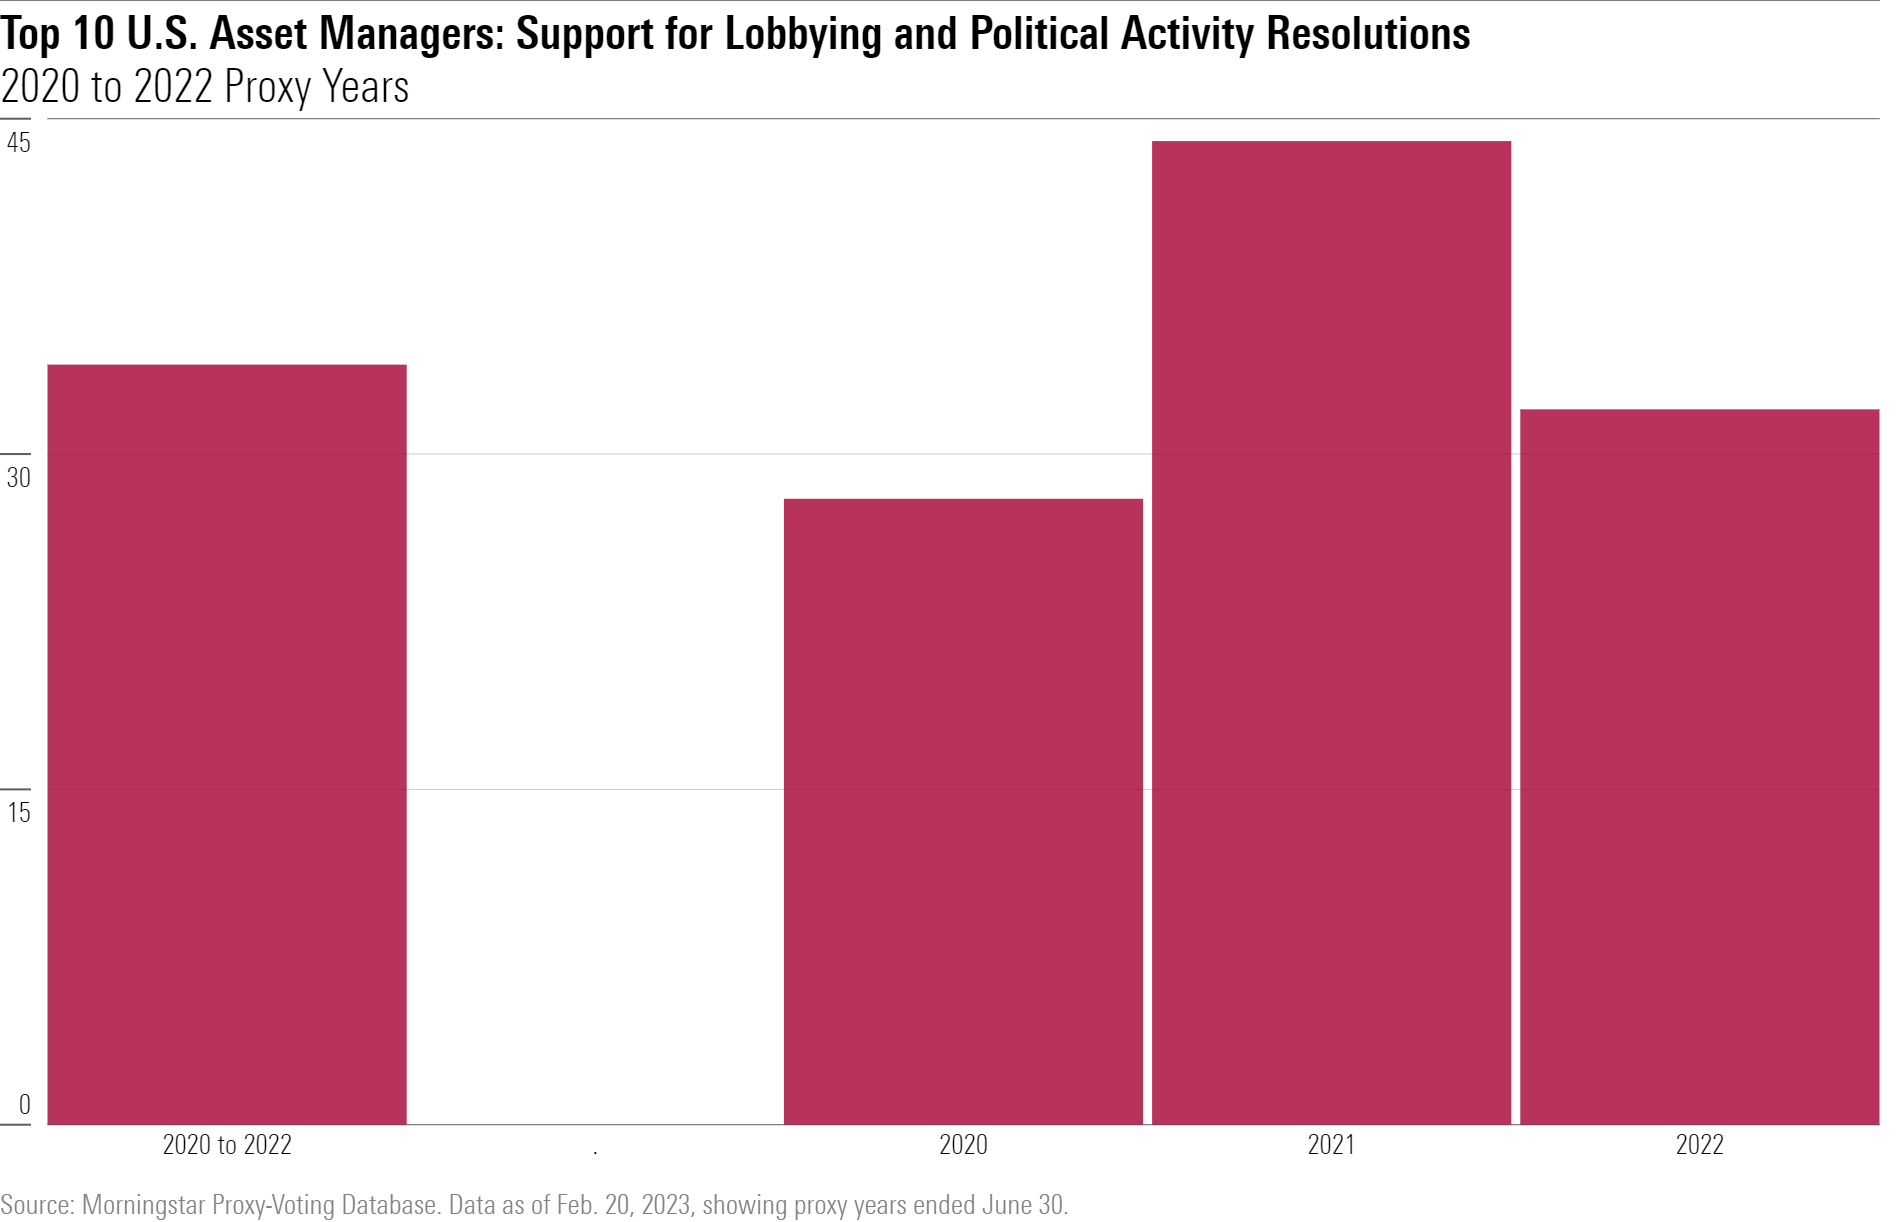 Chart showing that the top 10 U.S. asset managers cast 34% of their fund votes in support of resolutions calling for transparency on lobbying and political activity.